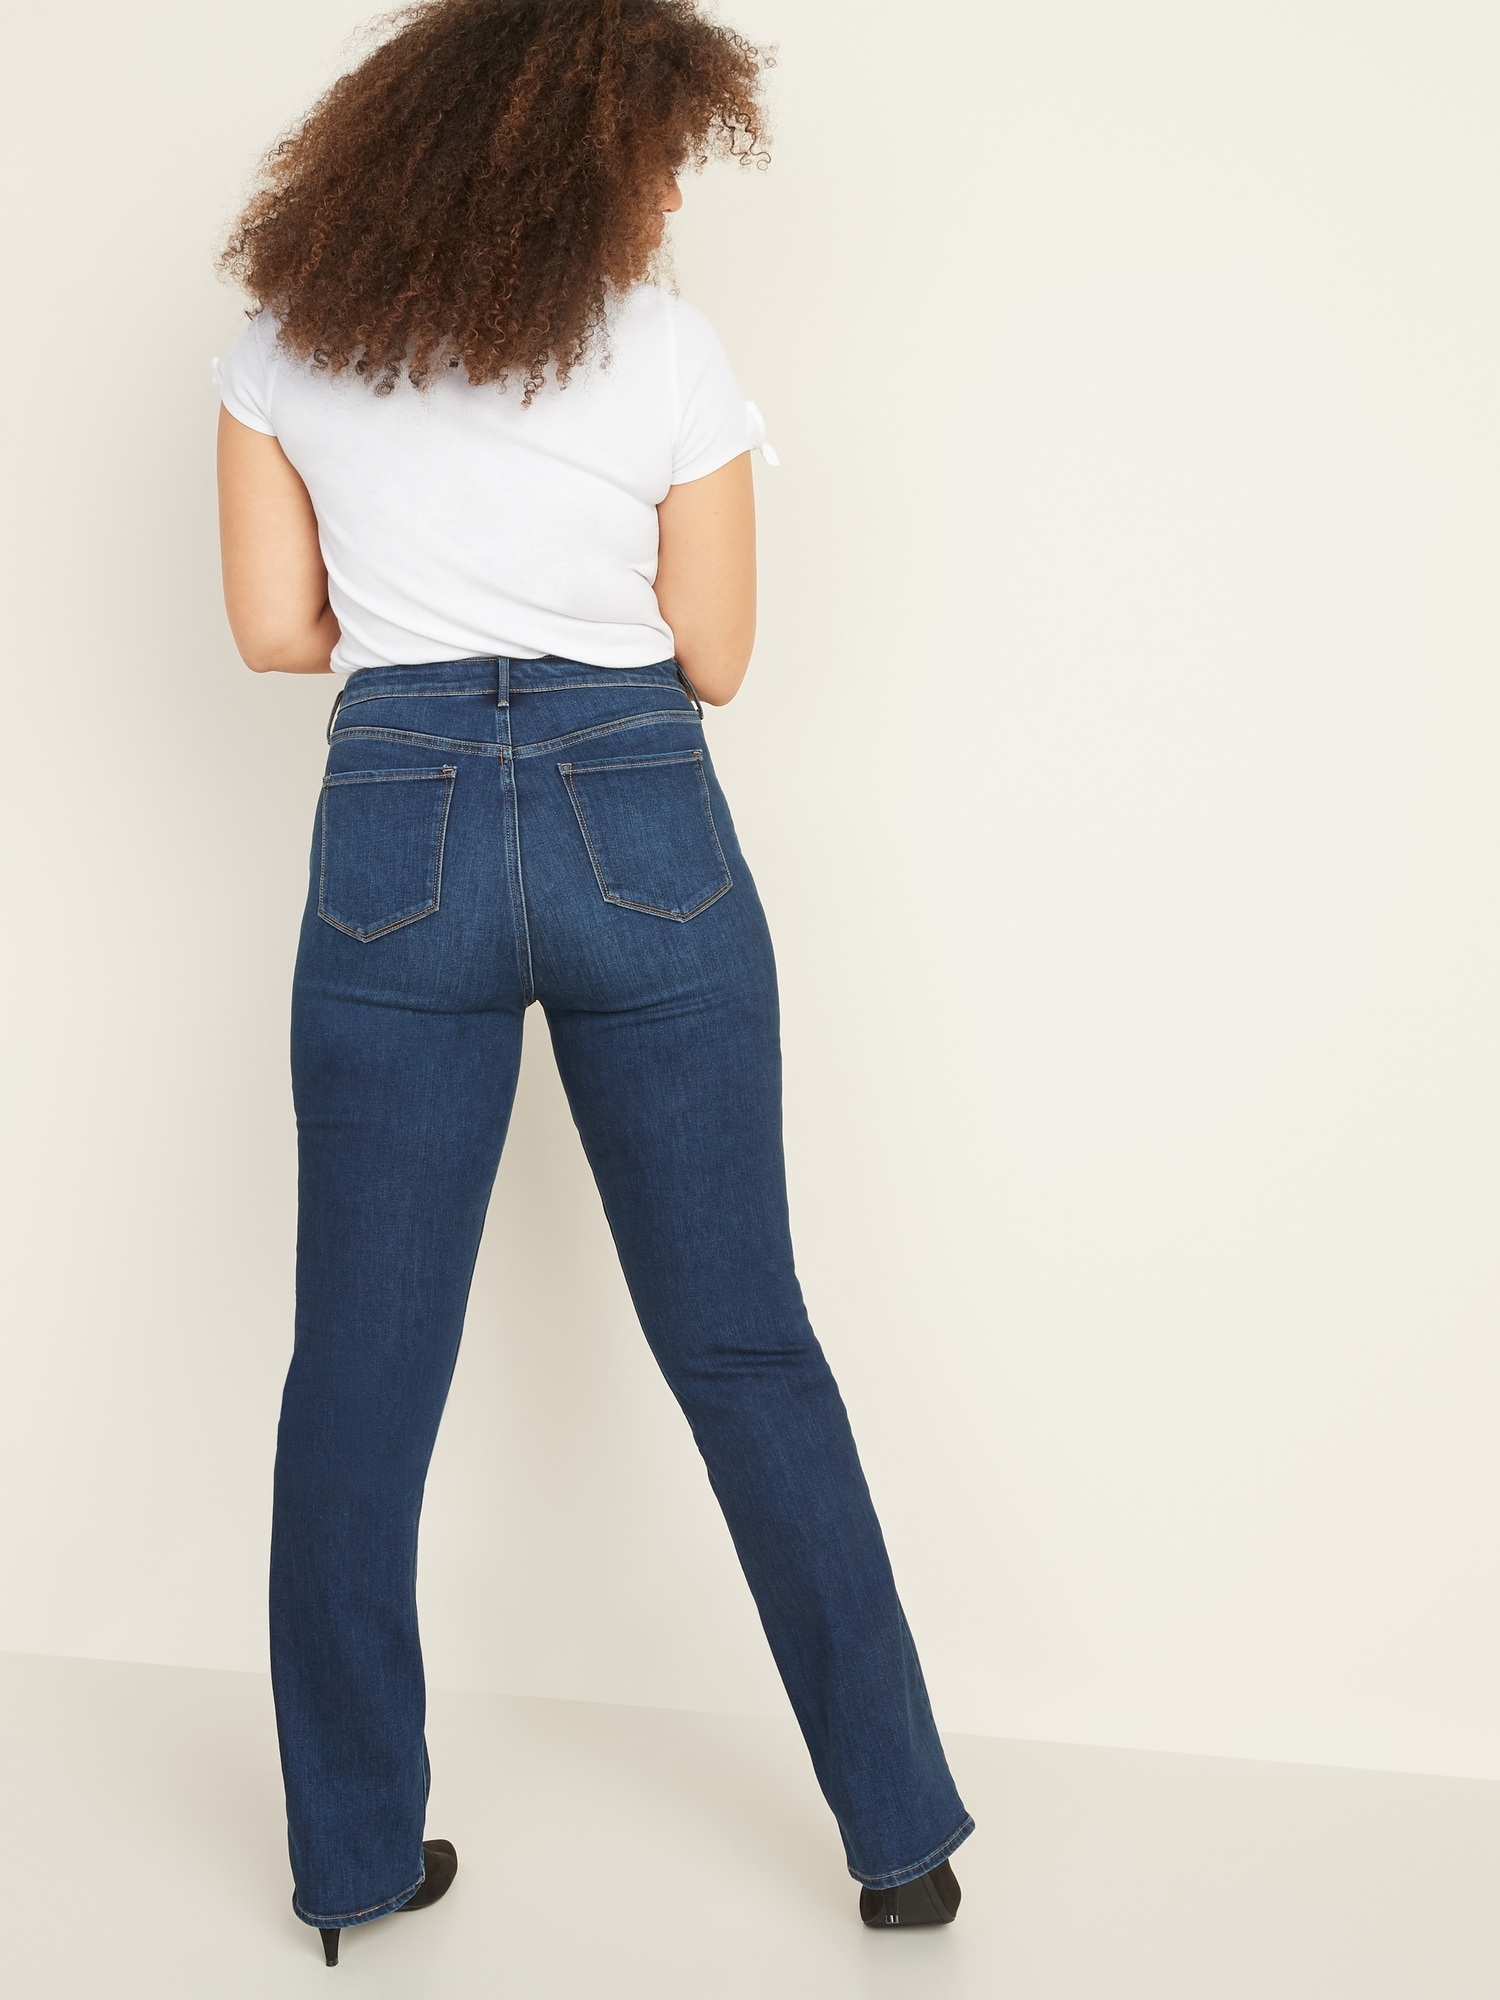 High-Waisted Kicker Boot-Cut Jeans For Women | Old Navy